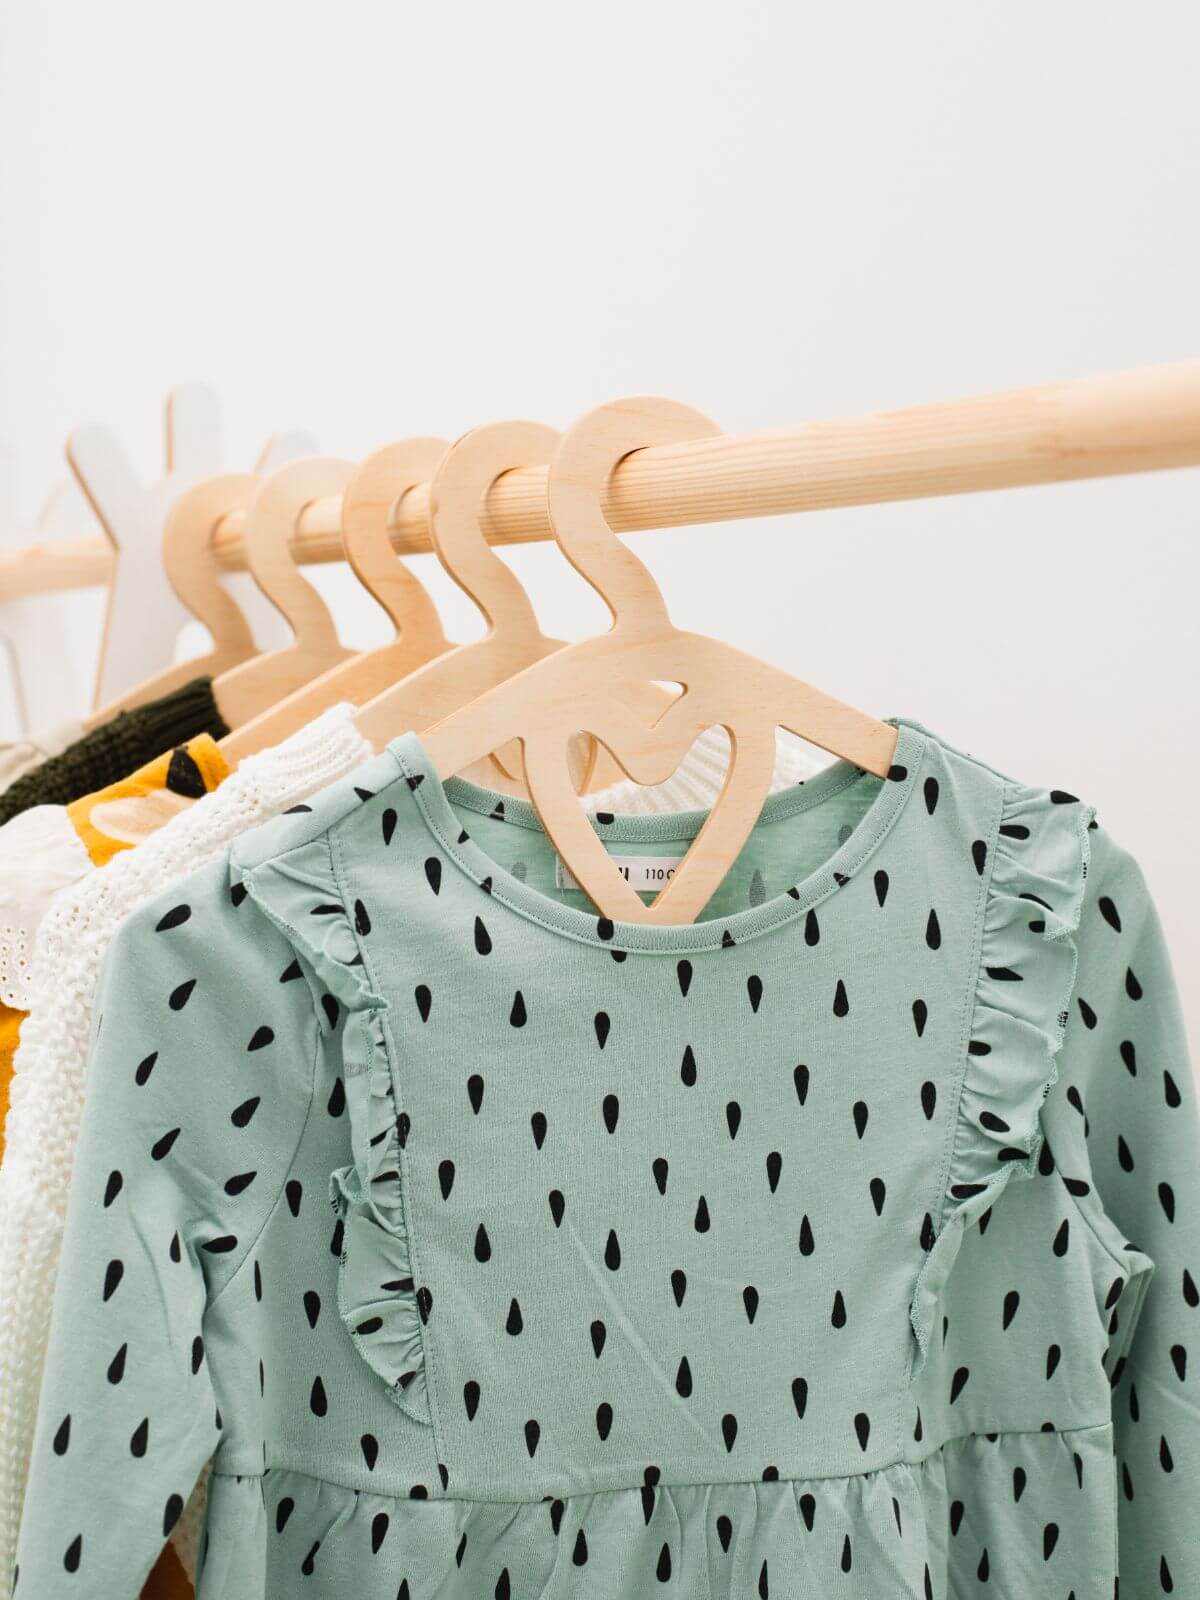 wooden hangers for clothes